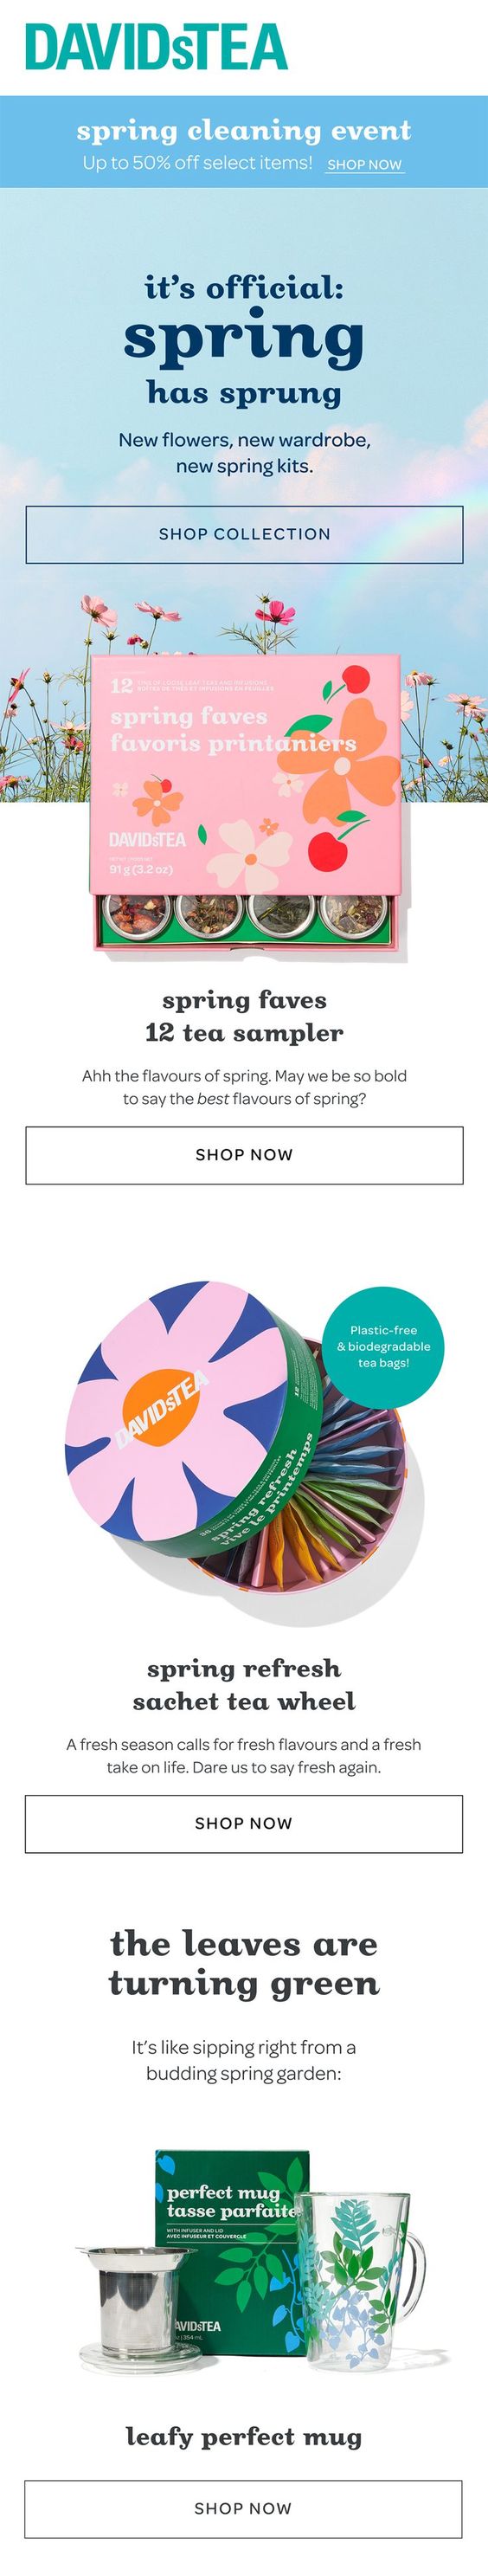 Email from DavidsTea